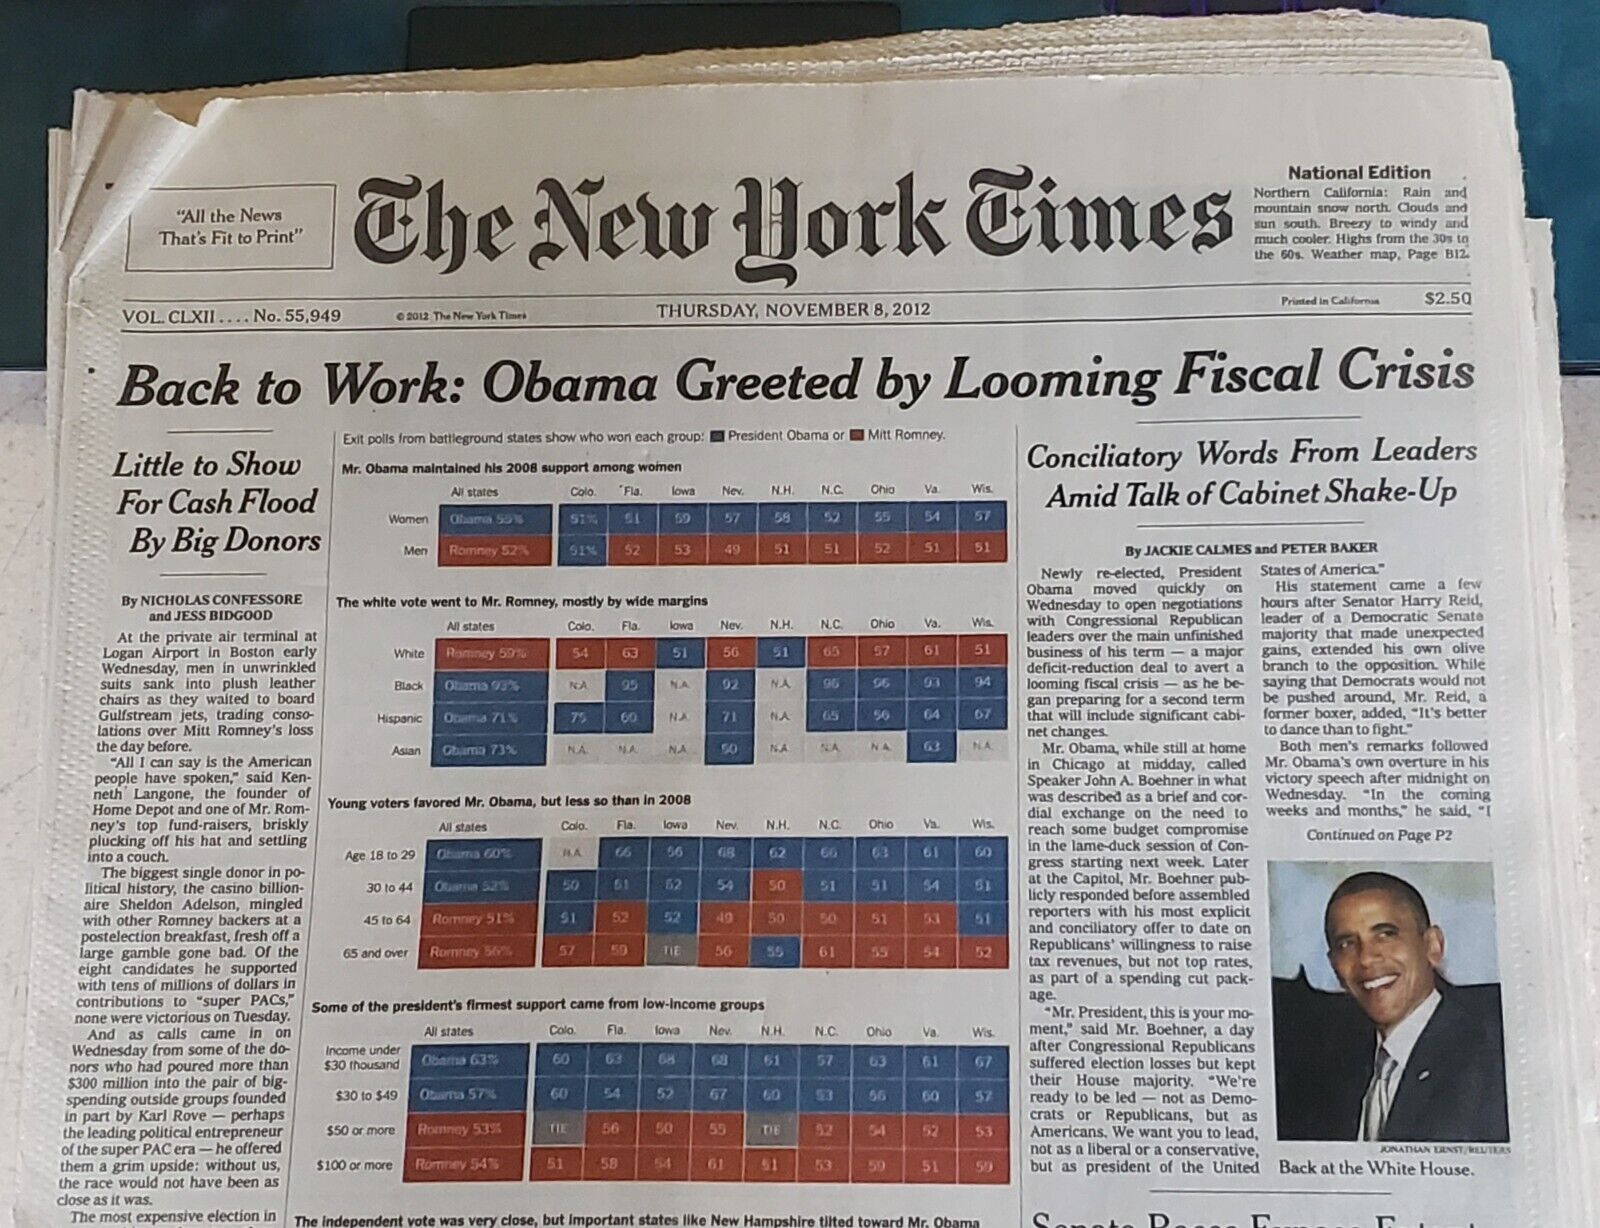 2012 NOVEMBER 8 NEW YORK TIMES NEWSPAPER - OBAMA GREETED BY LOOMING - No. 55,949